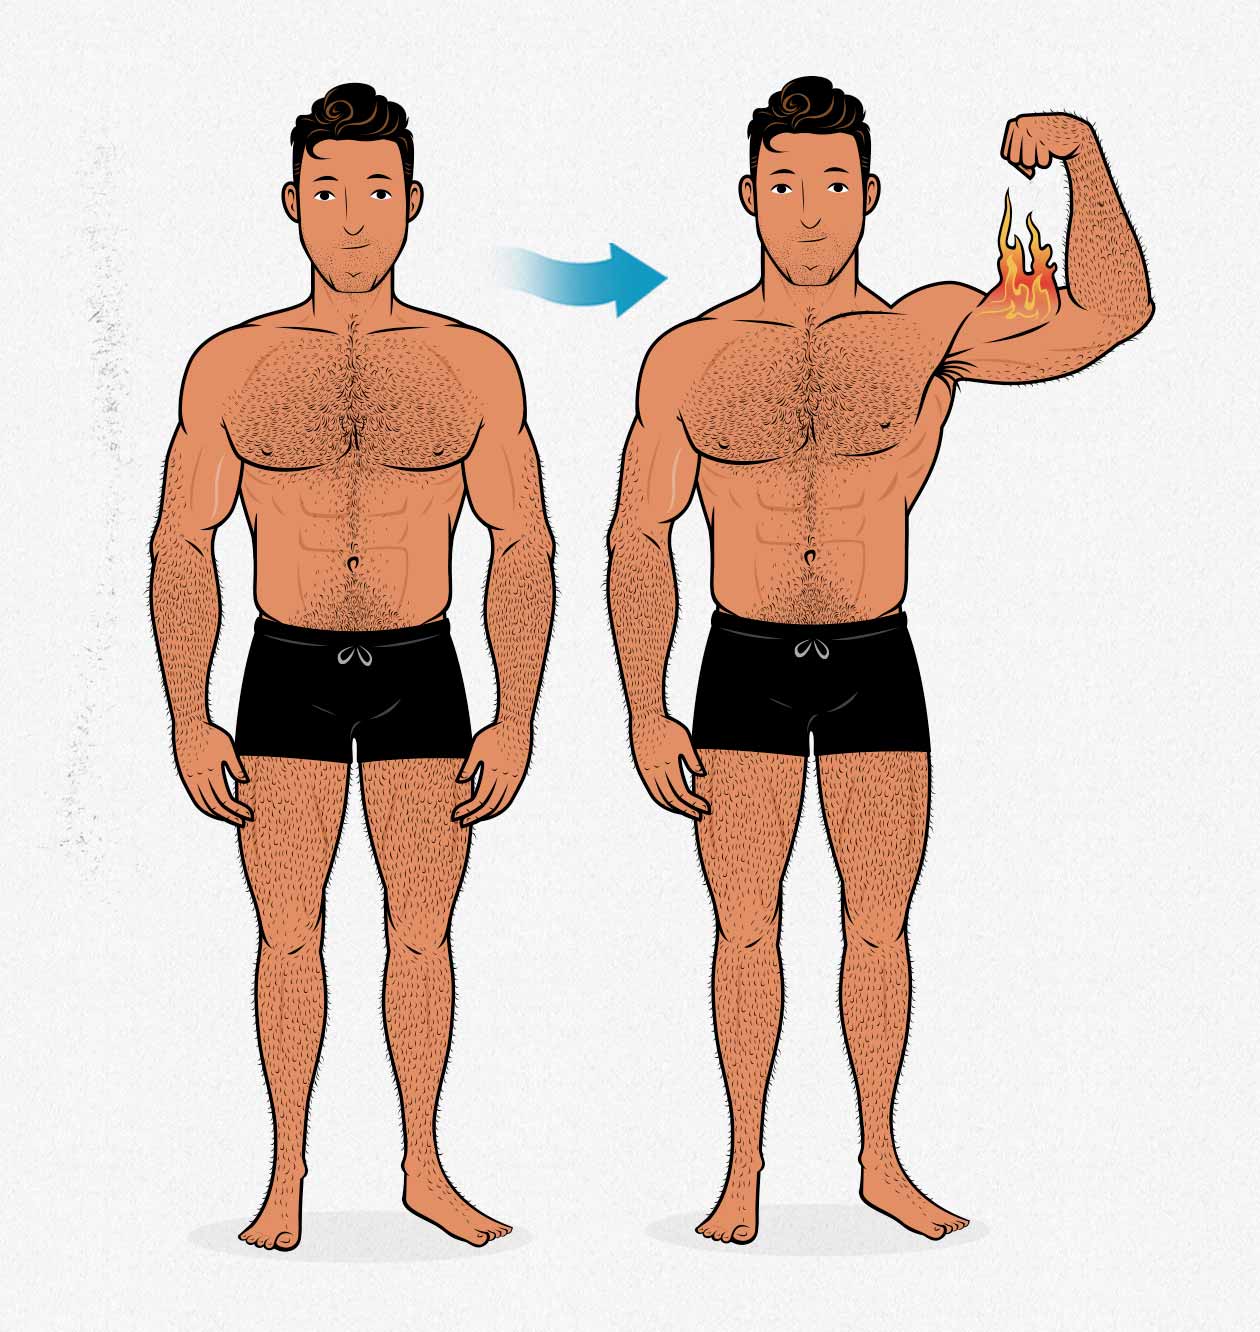 Illustration of a muscular man with a thin neck building a muscular neck.